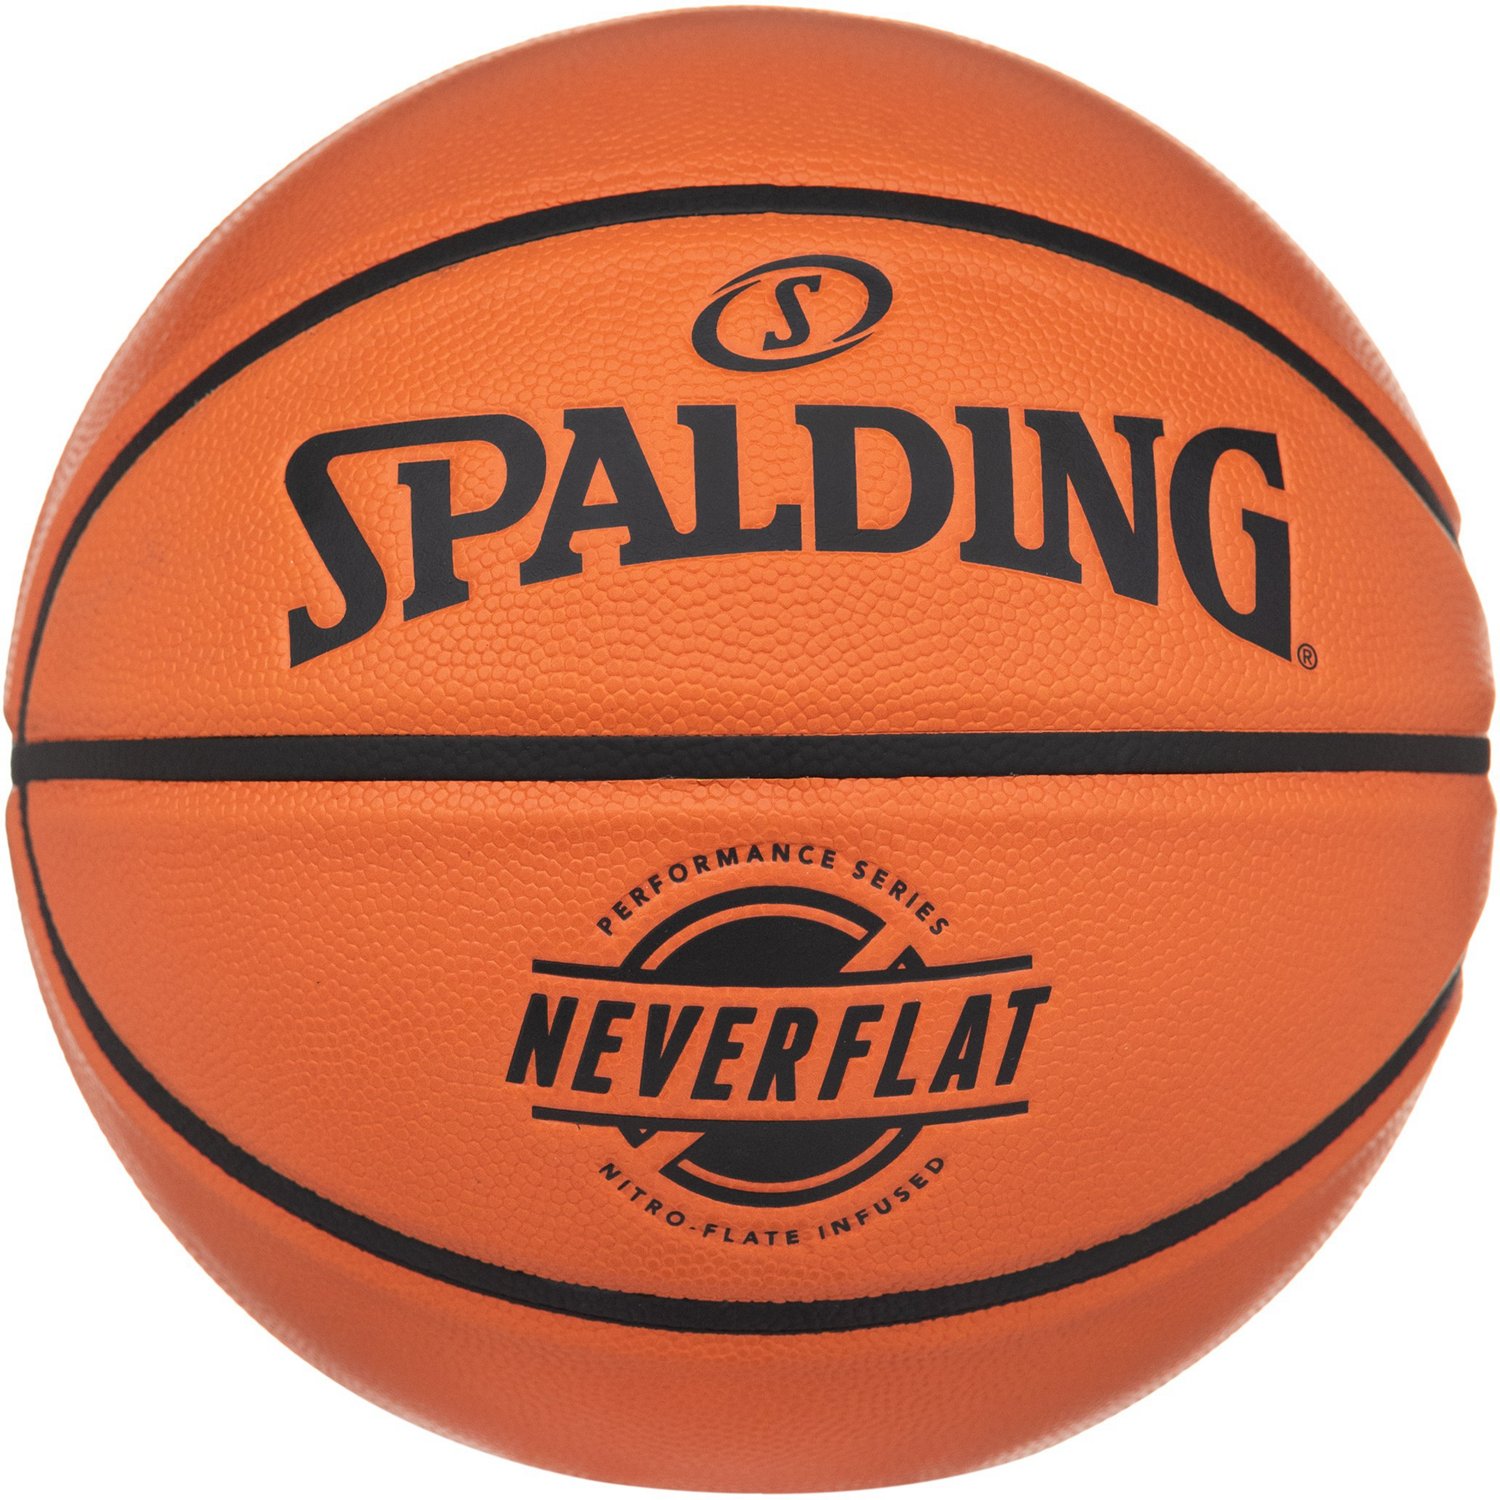 Spalding 29.5 in Neverflat Basketball | Free Shipping at Academy